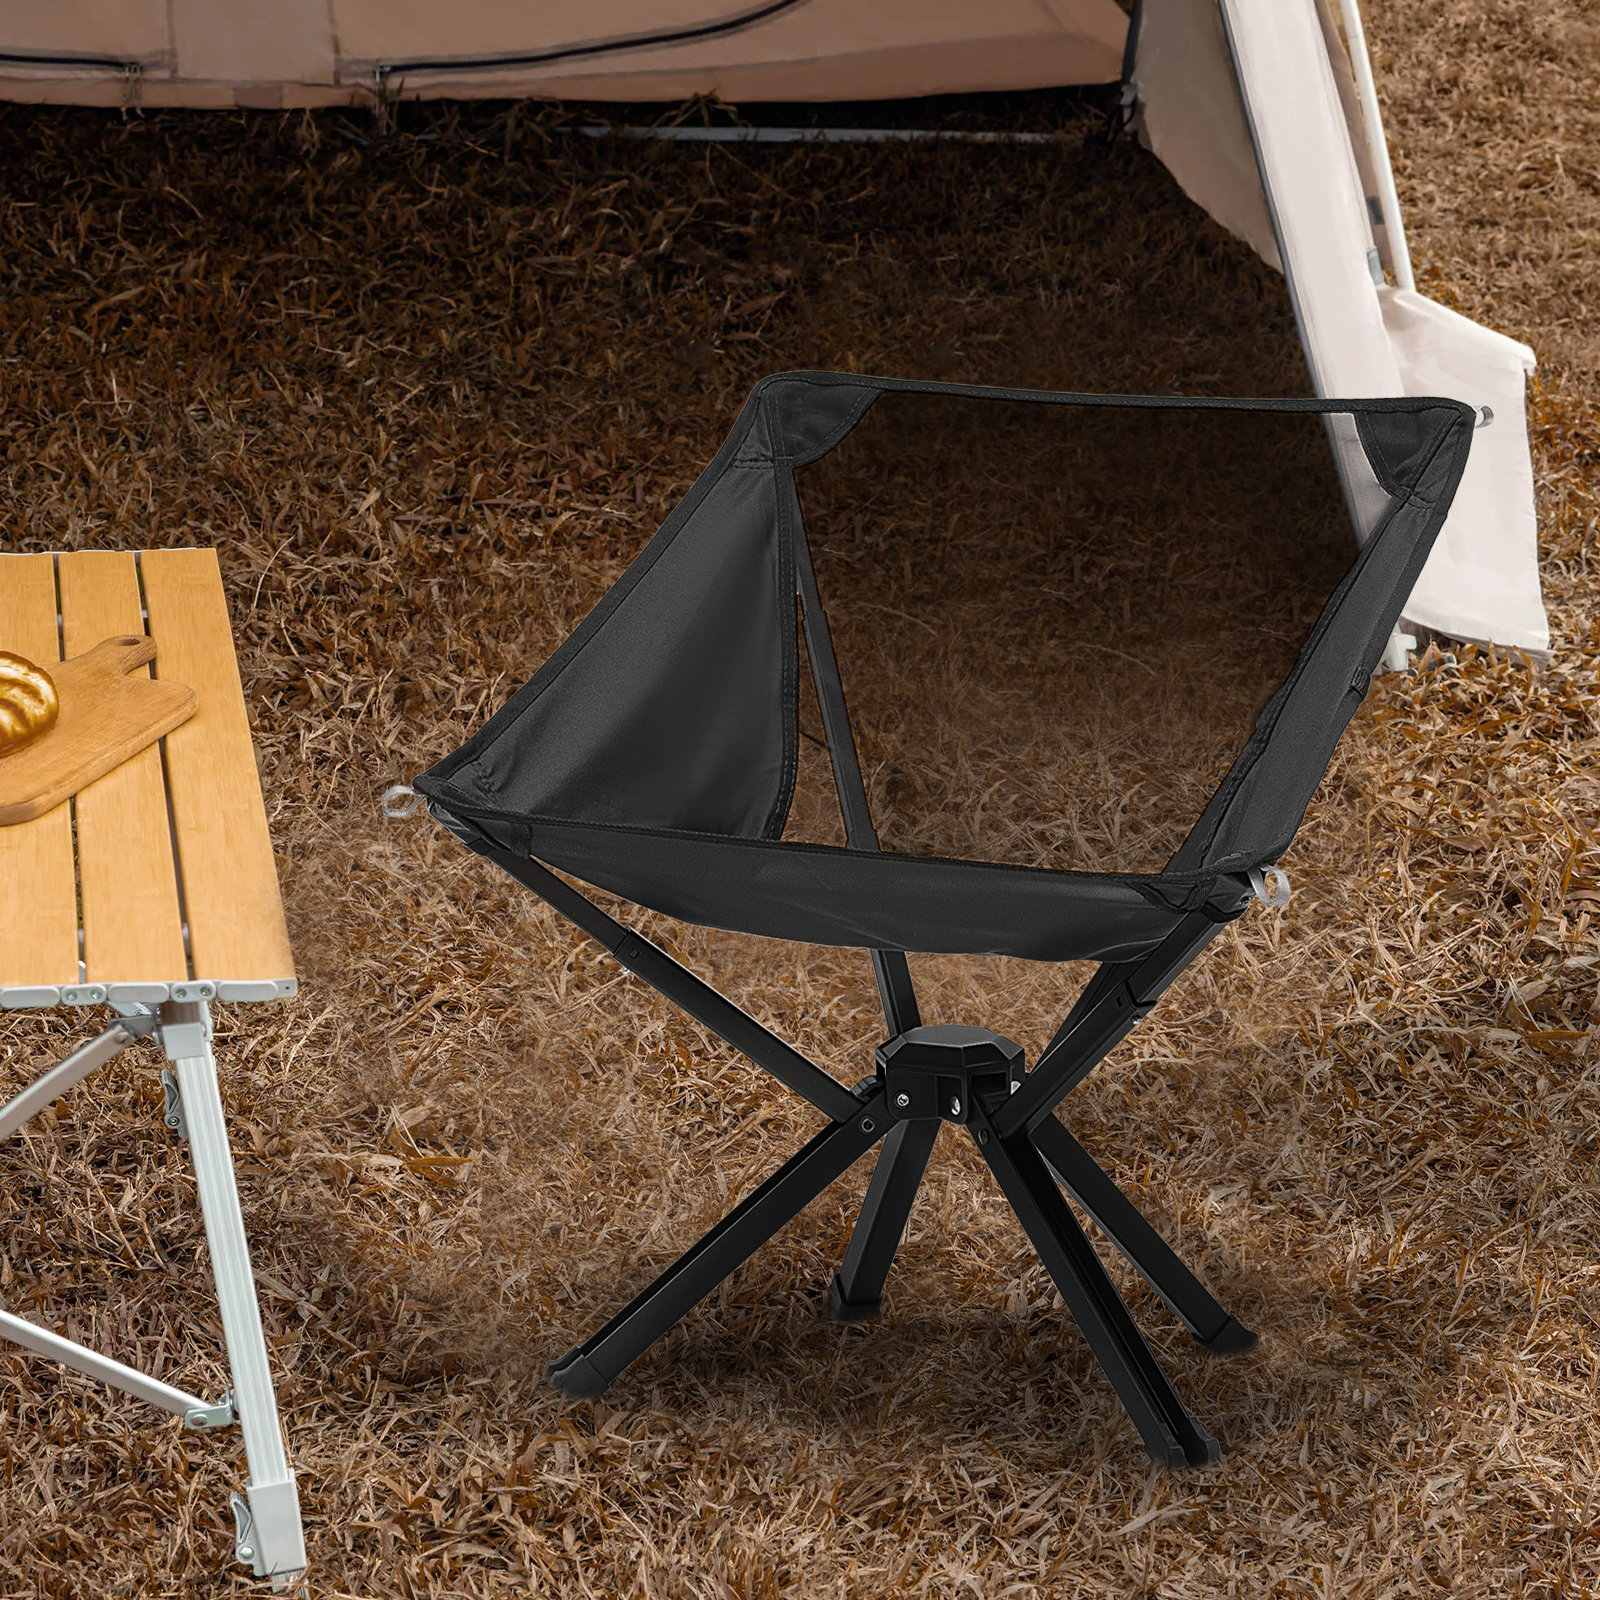 Organizers Hiking Camping, Folding Chair Camping Armrest